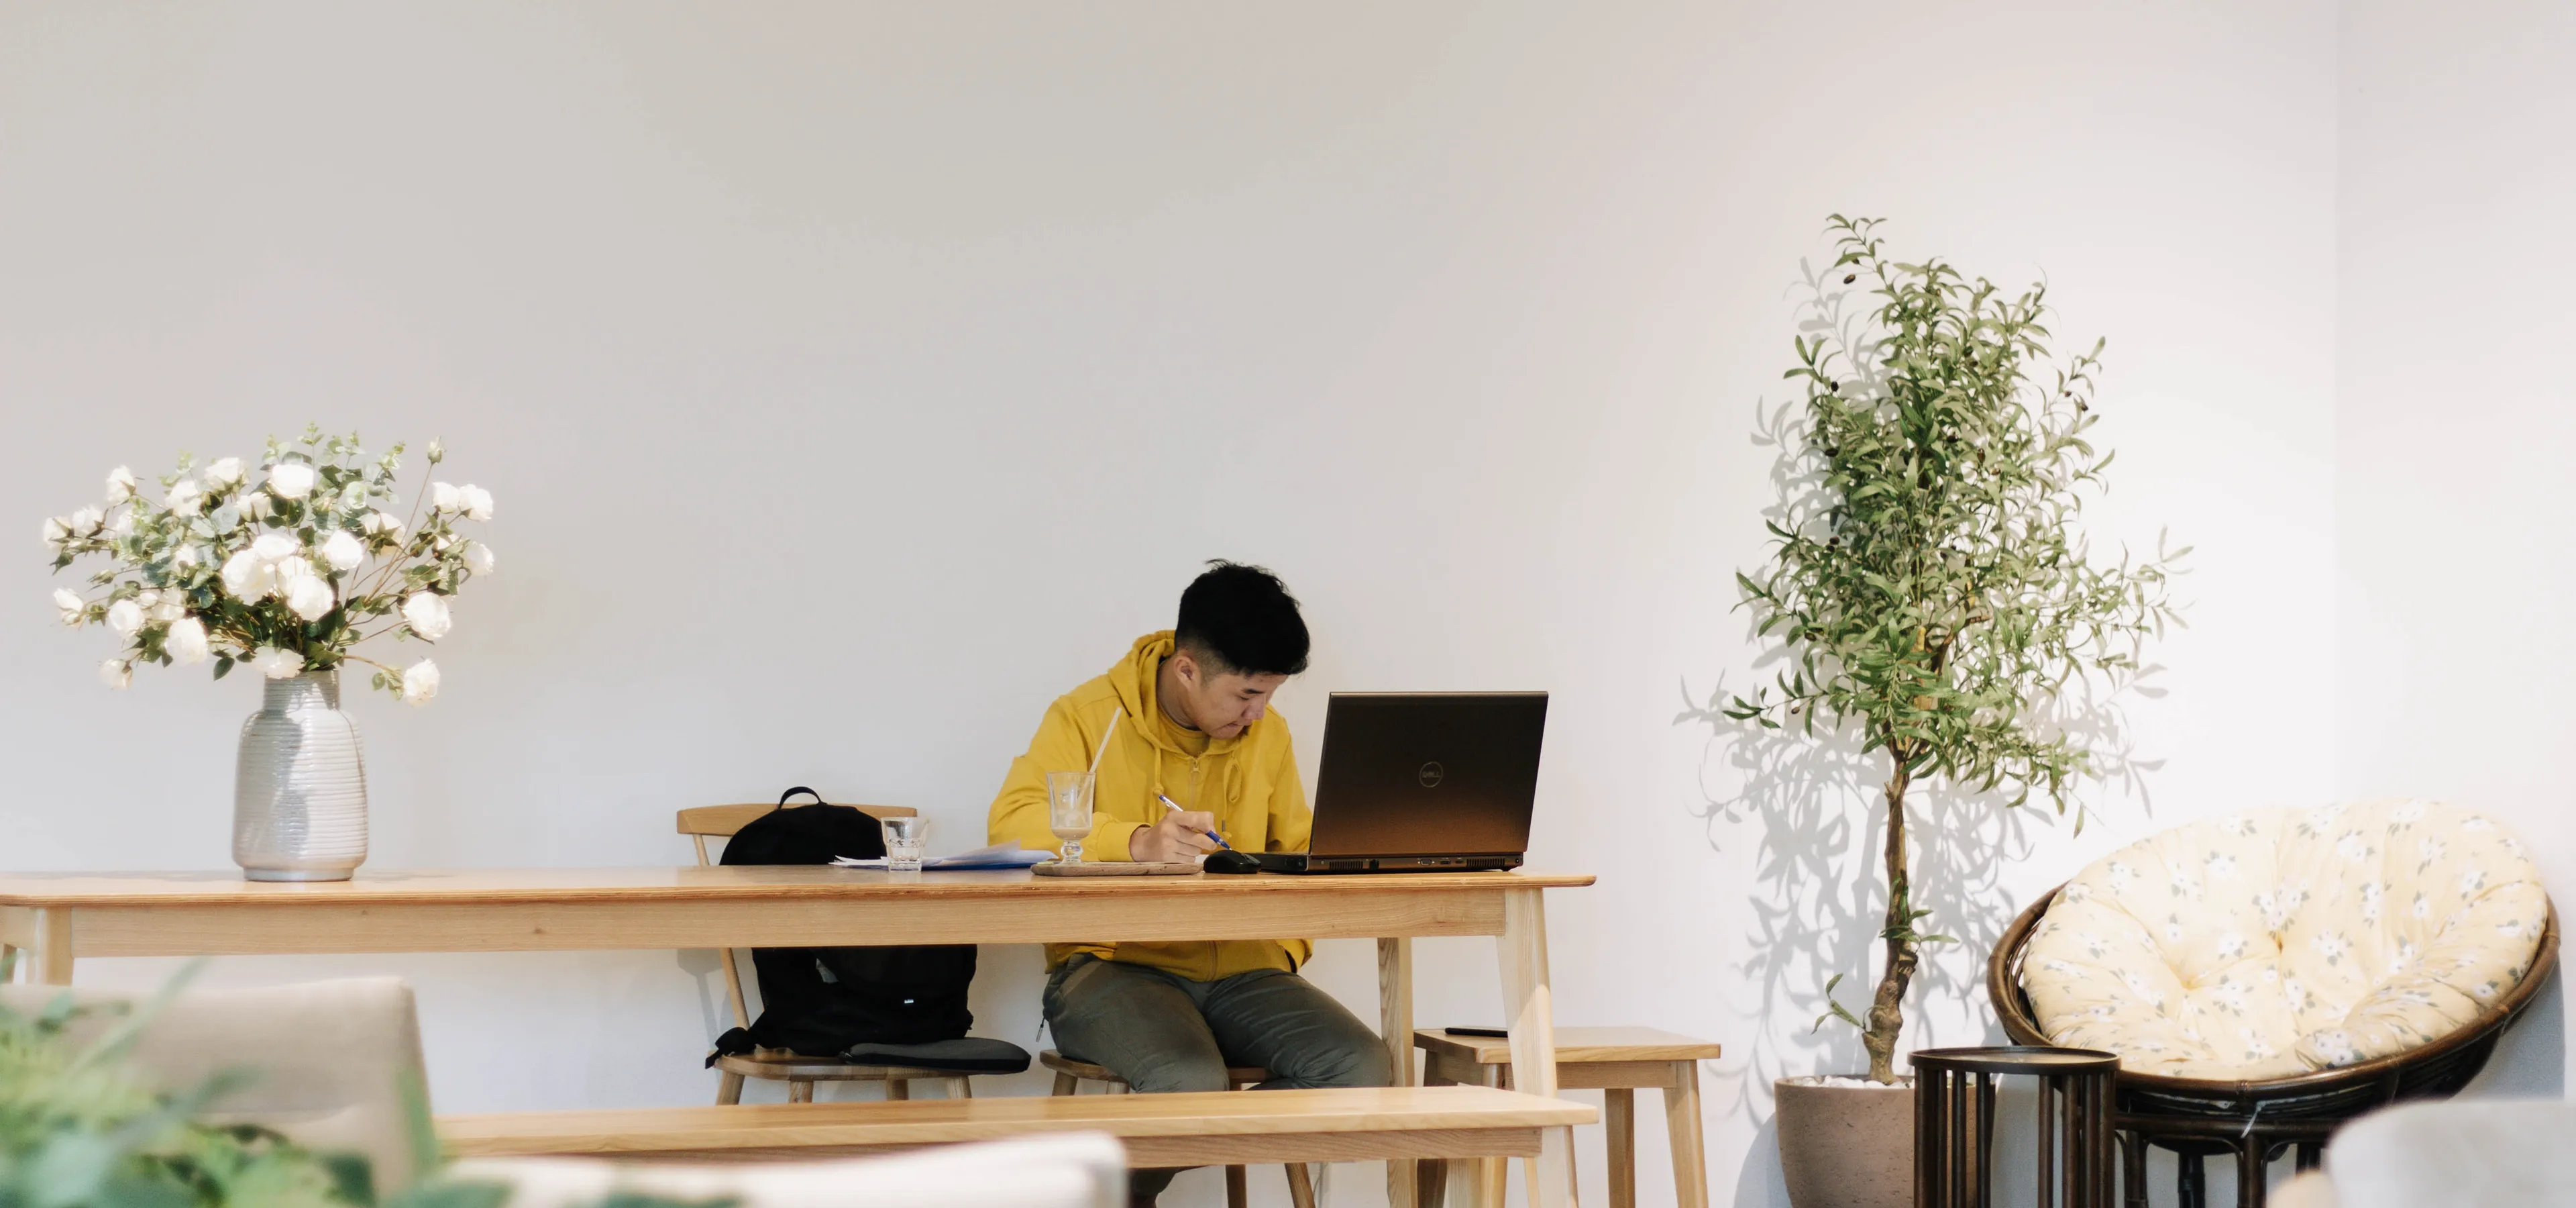 Man working at a laptop in a lifestyle environment